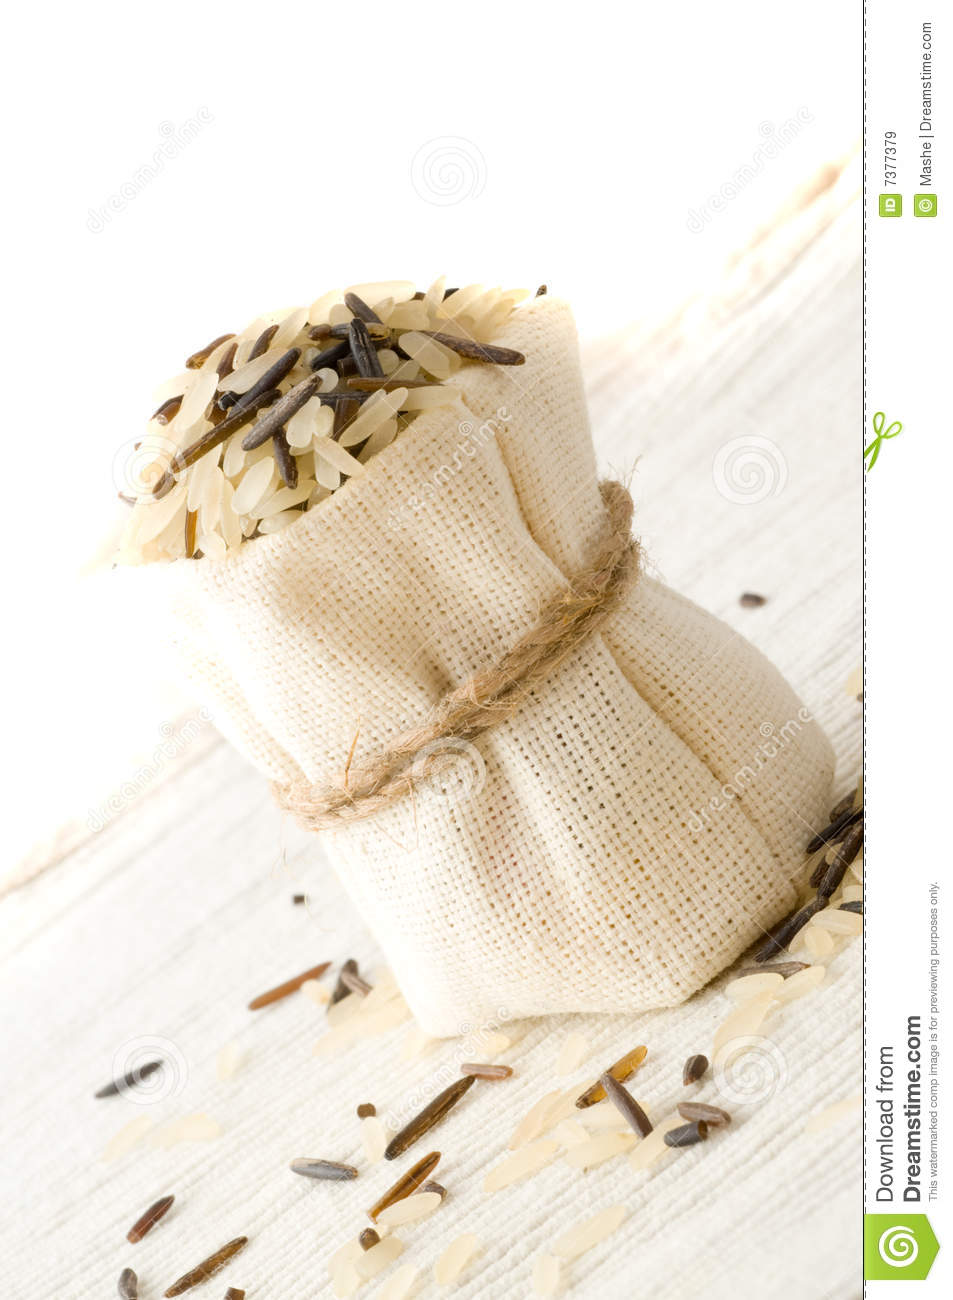 Rice In Small Sack Royalty Free Stock Images   Image  7377379